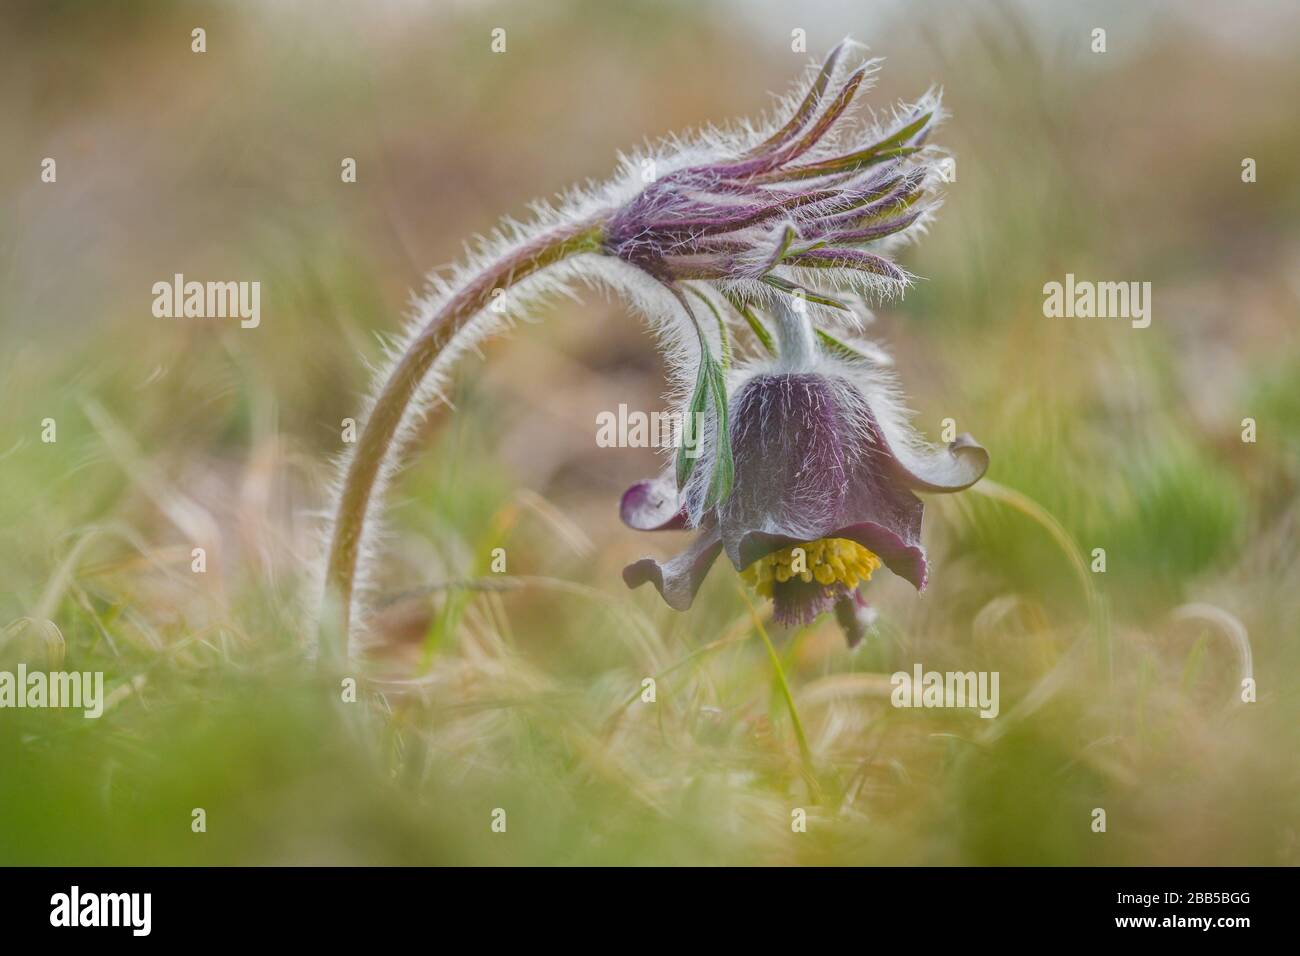 Fresh meadow anemone, small pasque flower with dark purple cup like flower, yellow pistils and hairy stalk growing in  meadow on a spring sunny day. Stock Photo